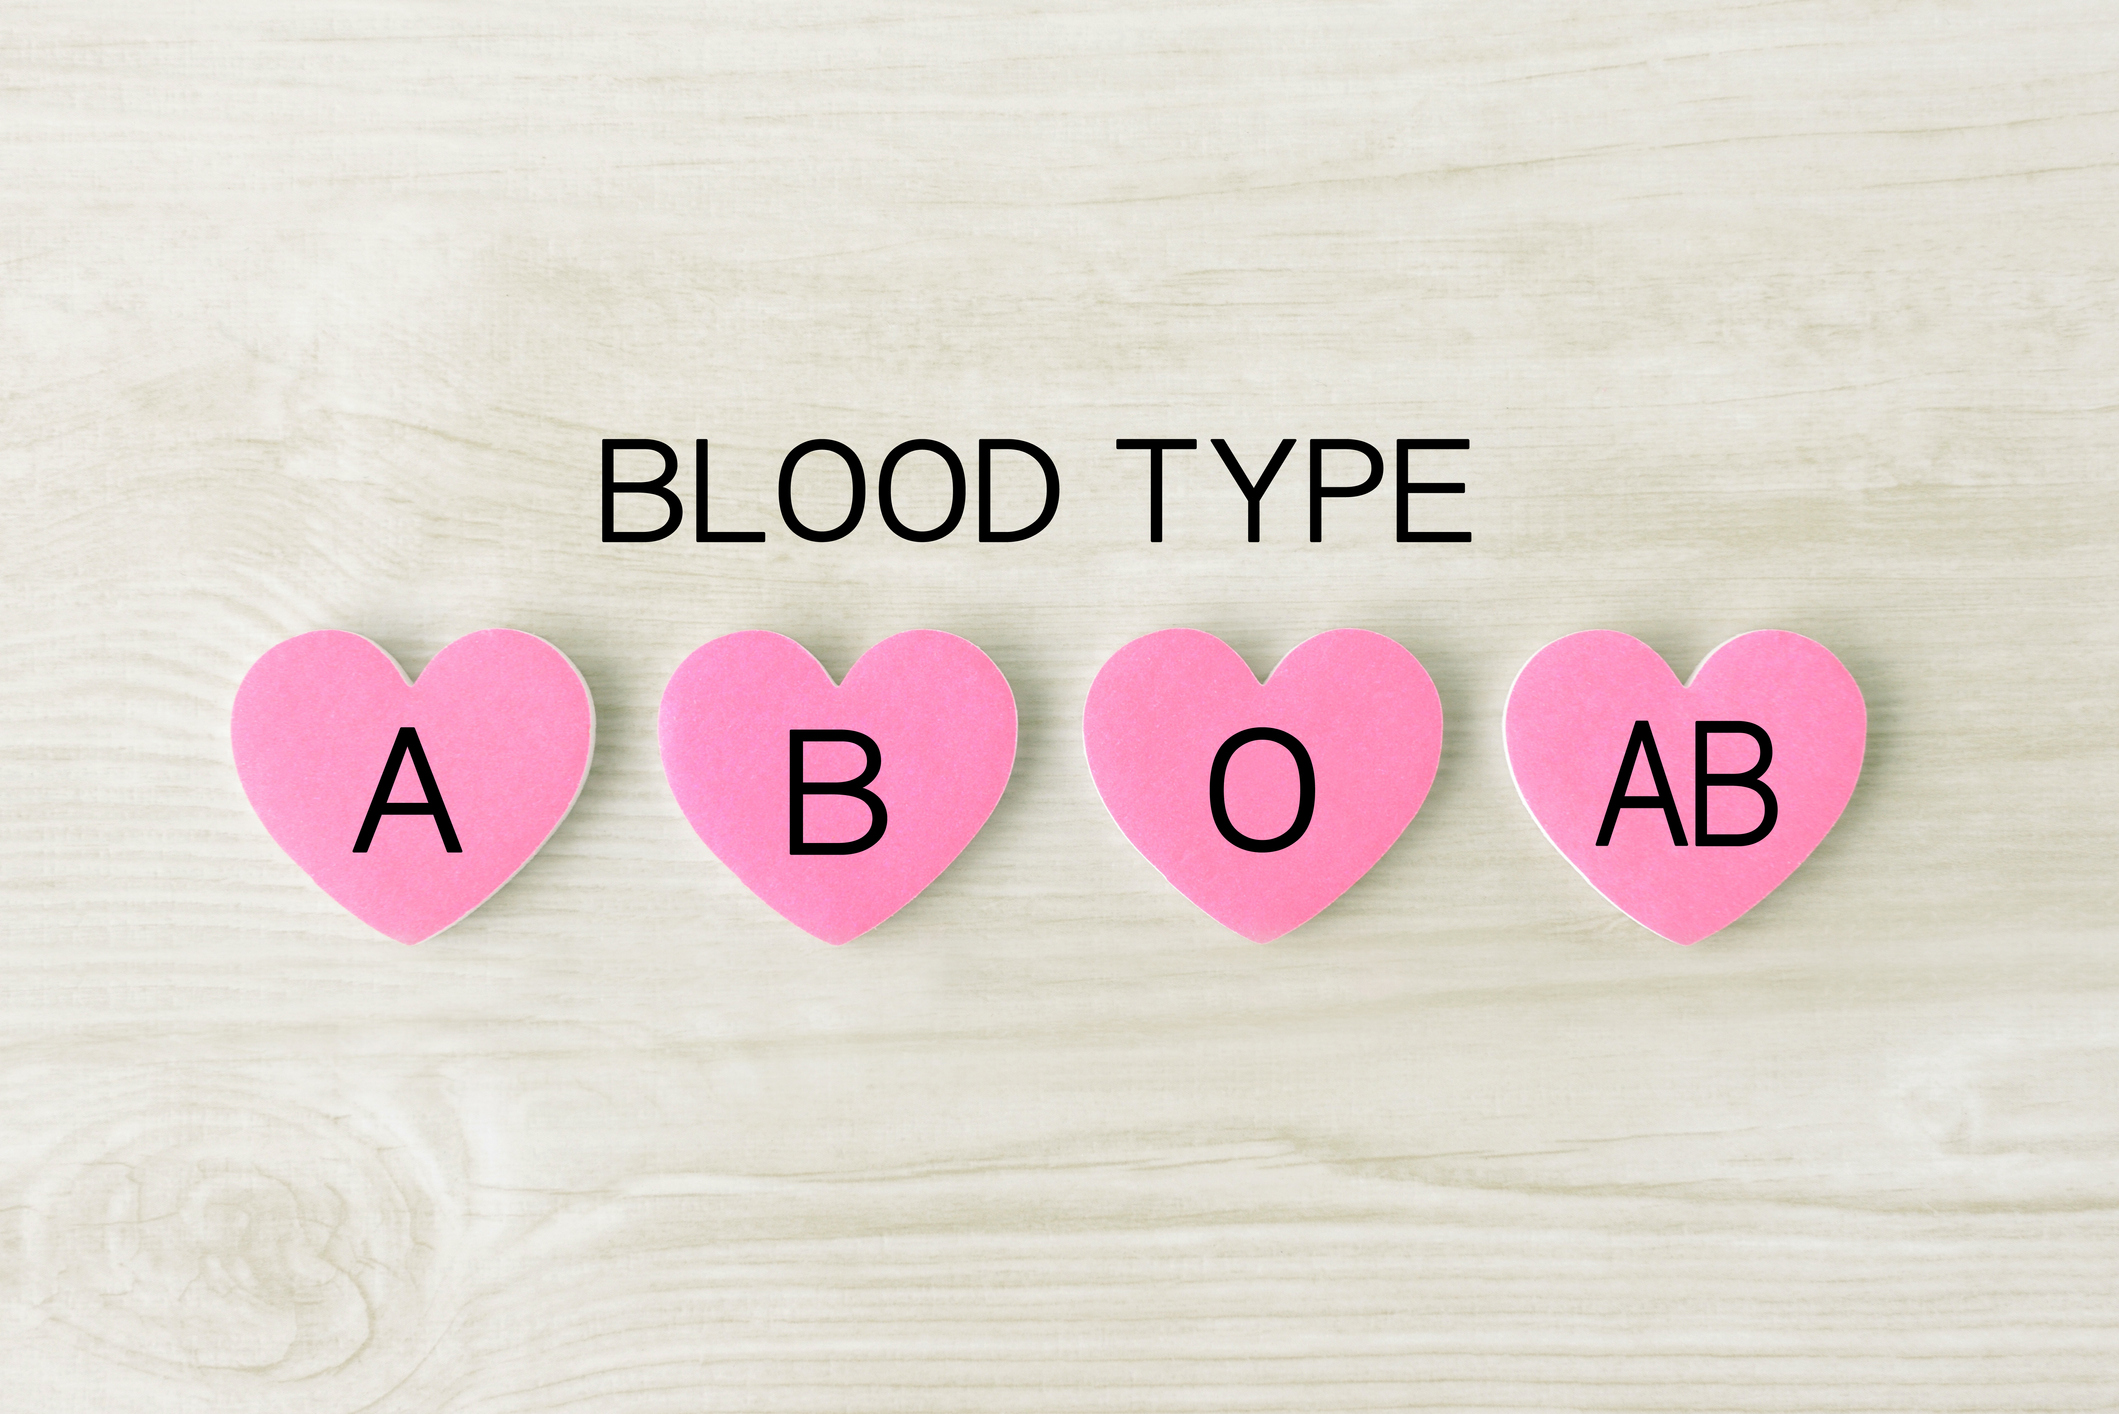 Does your blood type increase your risk for certain diseases?